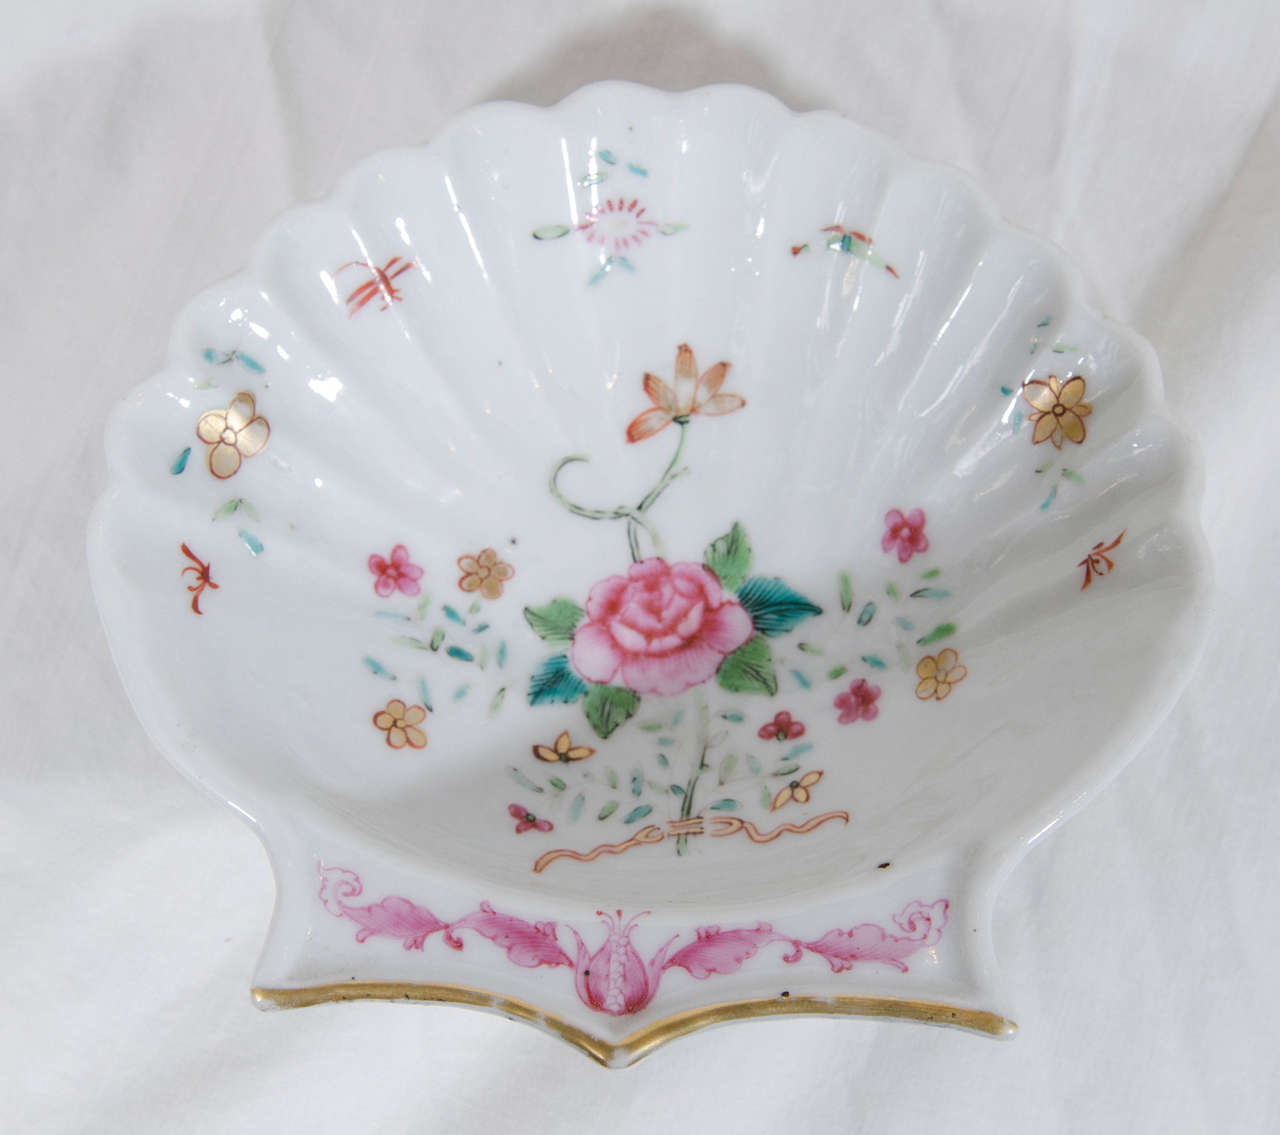 We are pleased to offer this pair of delicate shell shaped Chinese export dishes made in the 18th century. They are painted in soft famille rose colors featuring a pink peony among green and turquoise leaves. 
Dimensions: 5.5